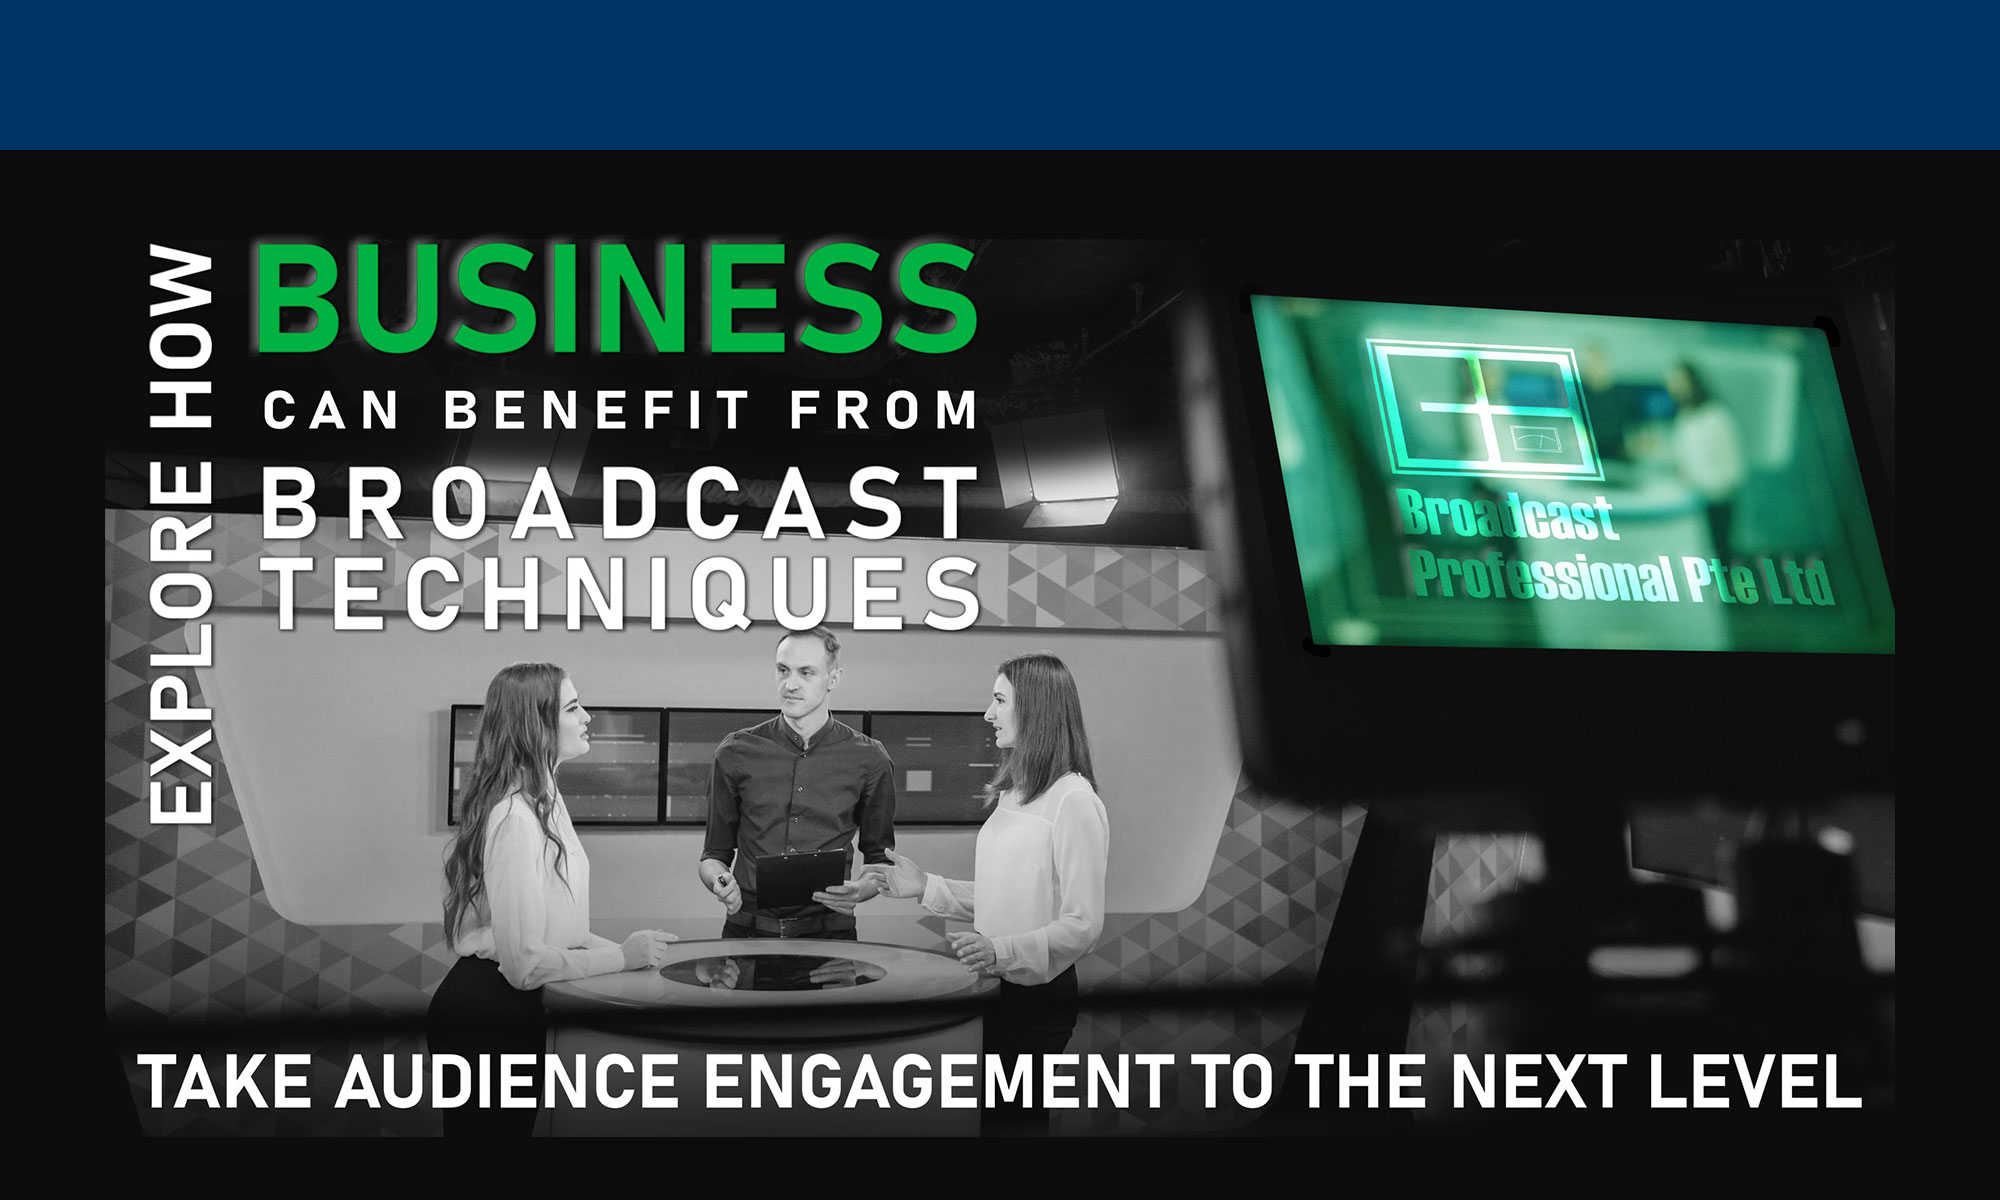 Take Audience Engagement to the Next Level